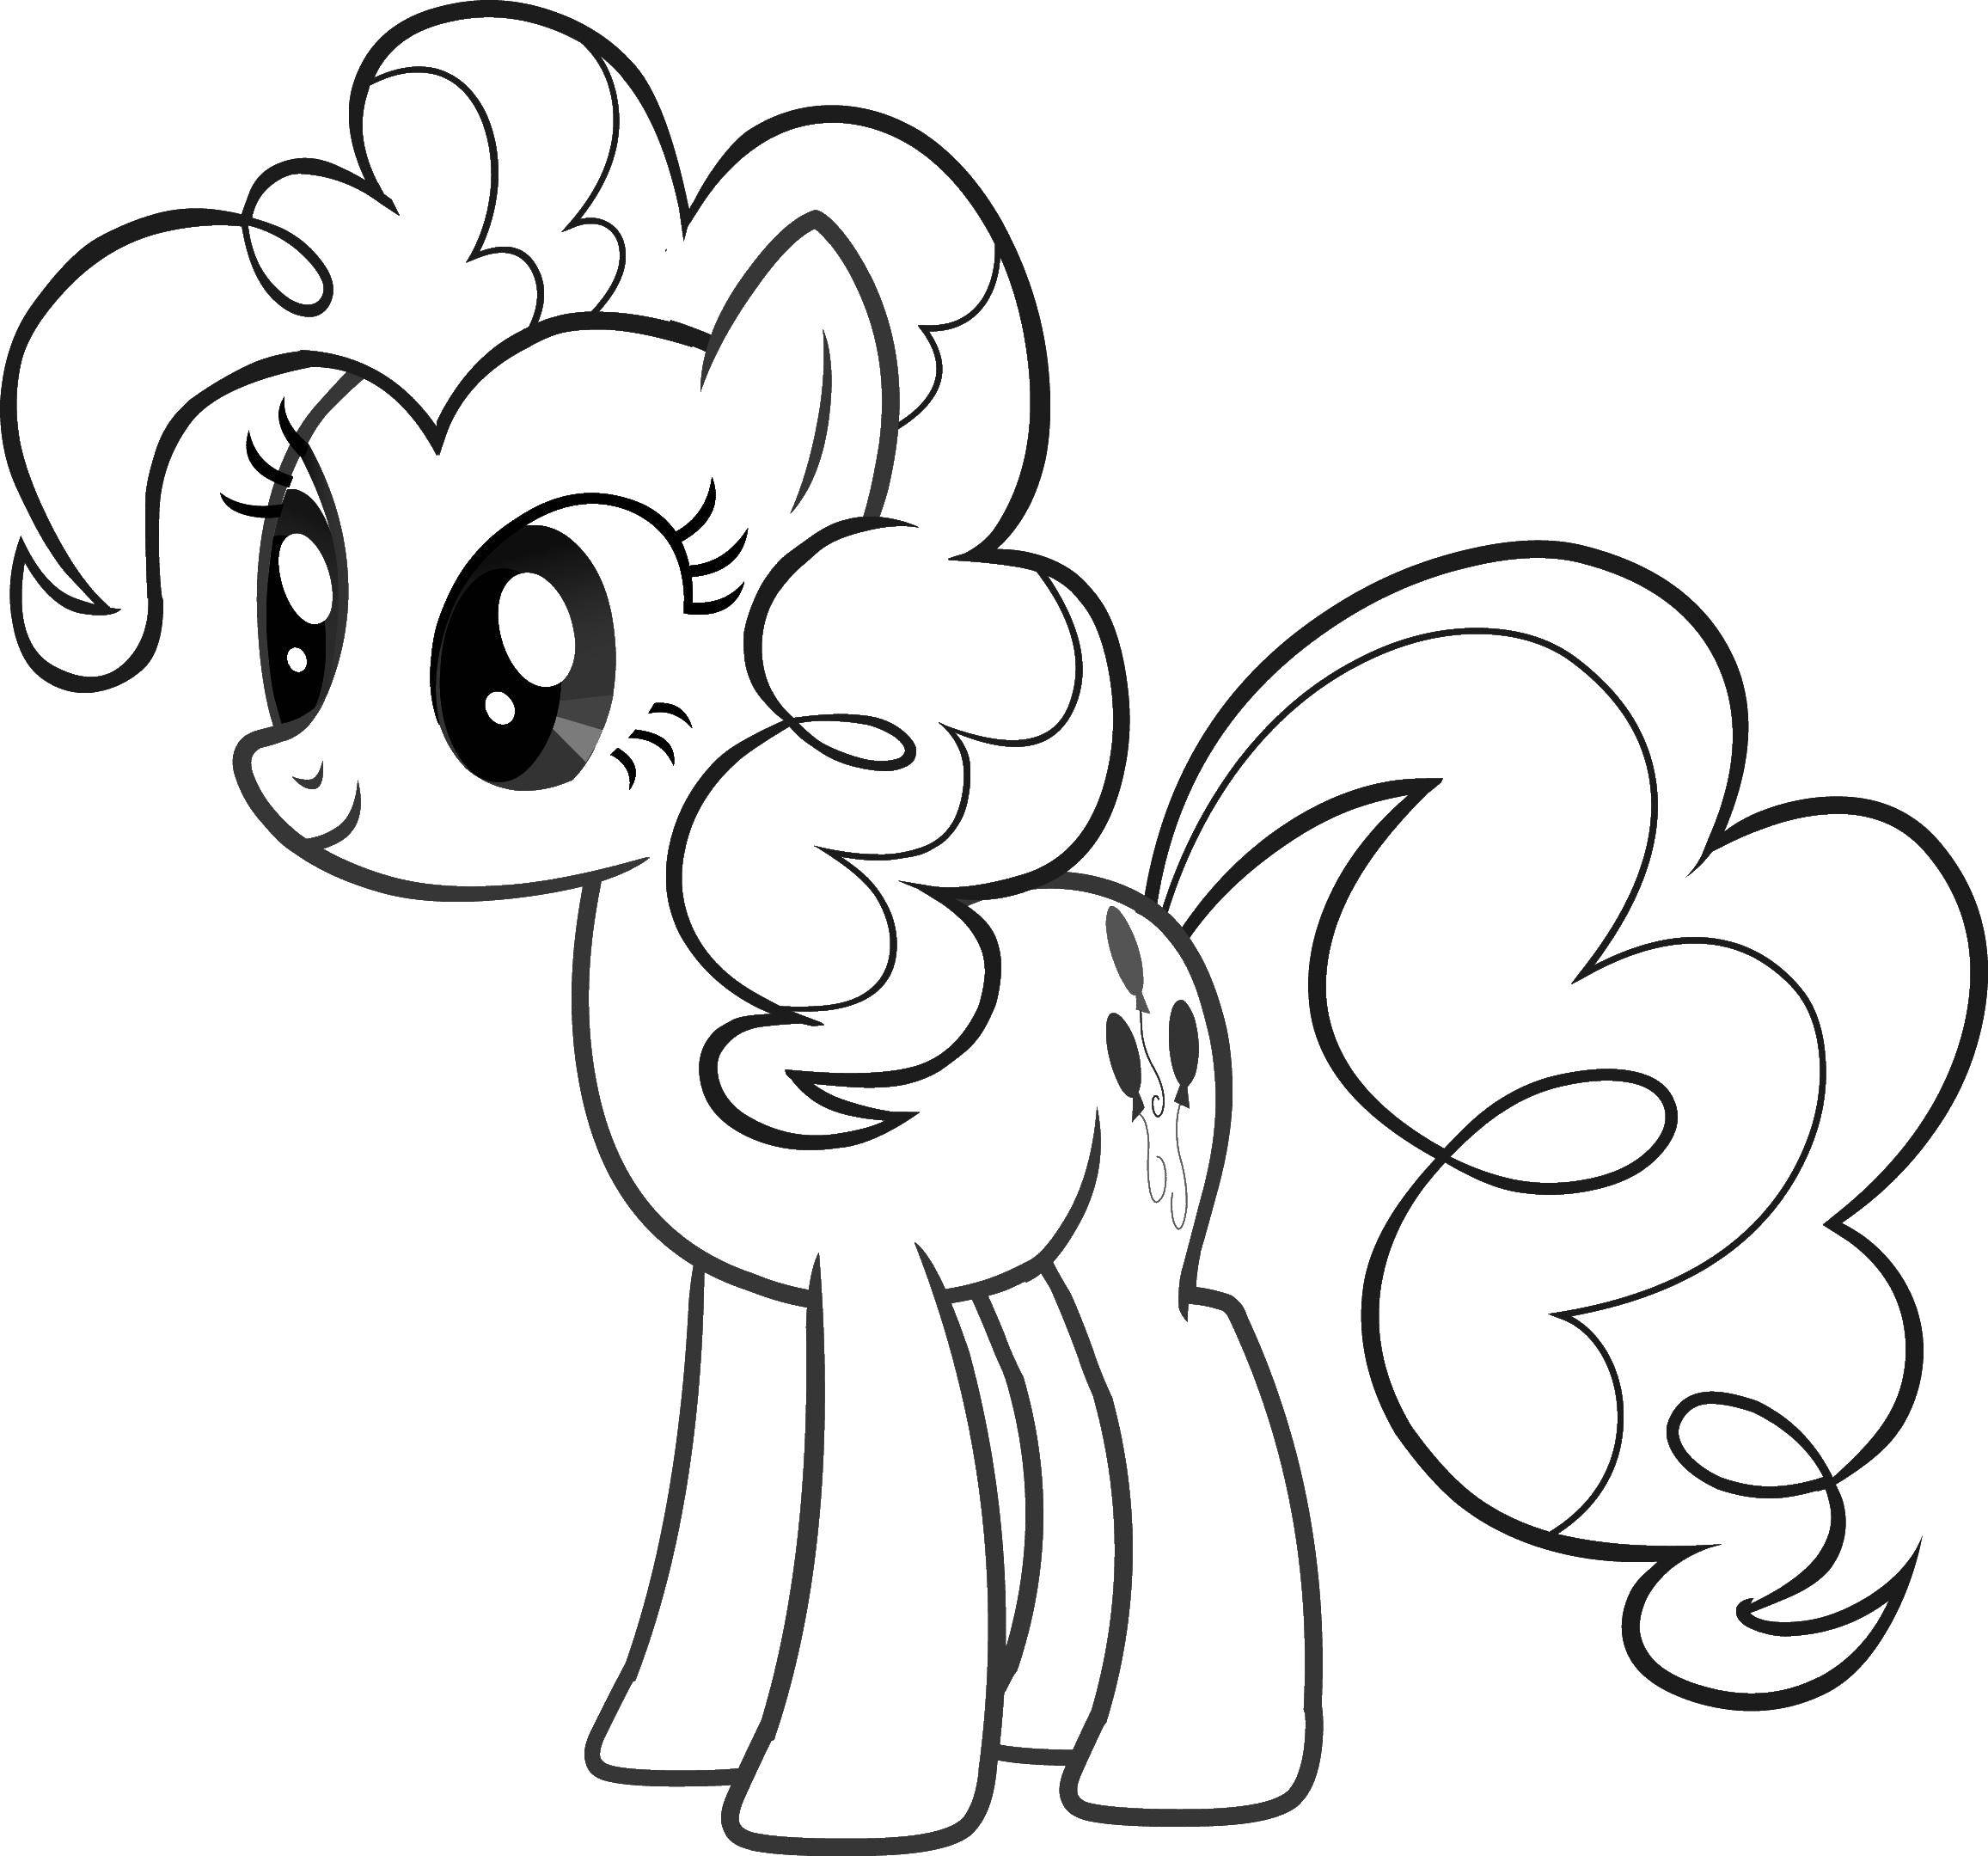 Coloring Pony. Category Ponies. Tags:  pony, cartoon, for girls.